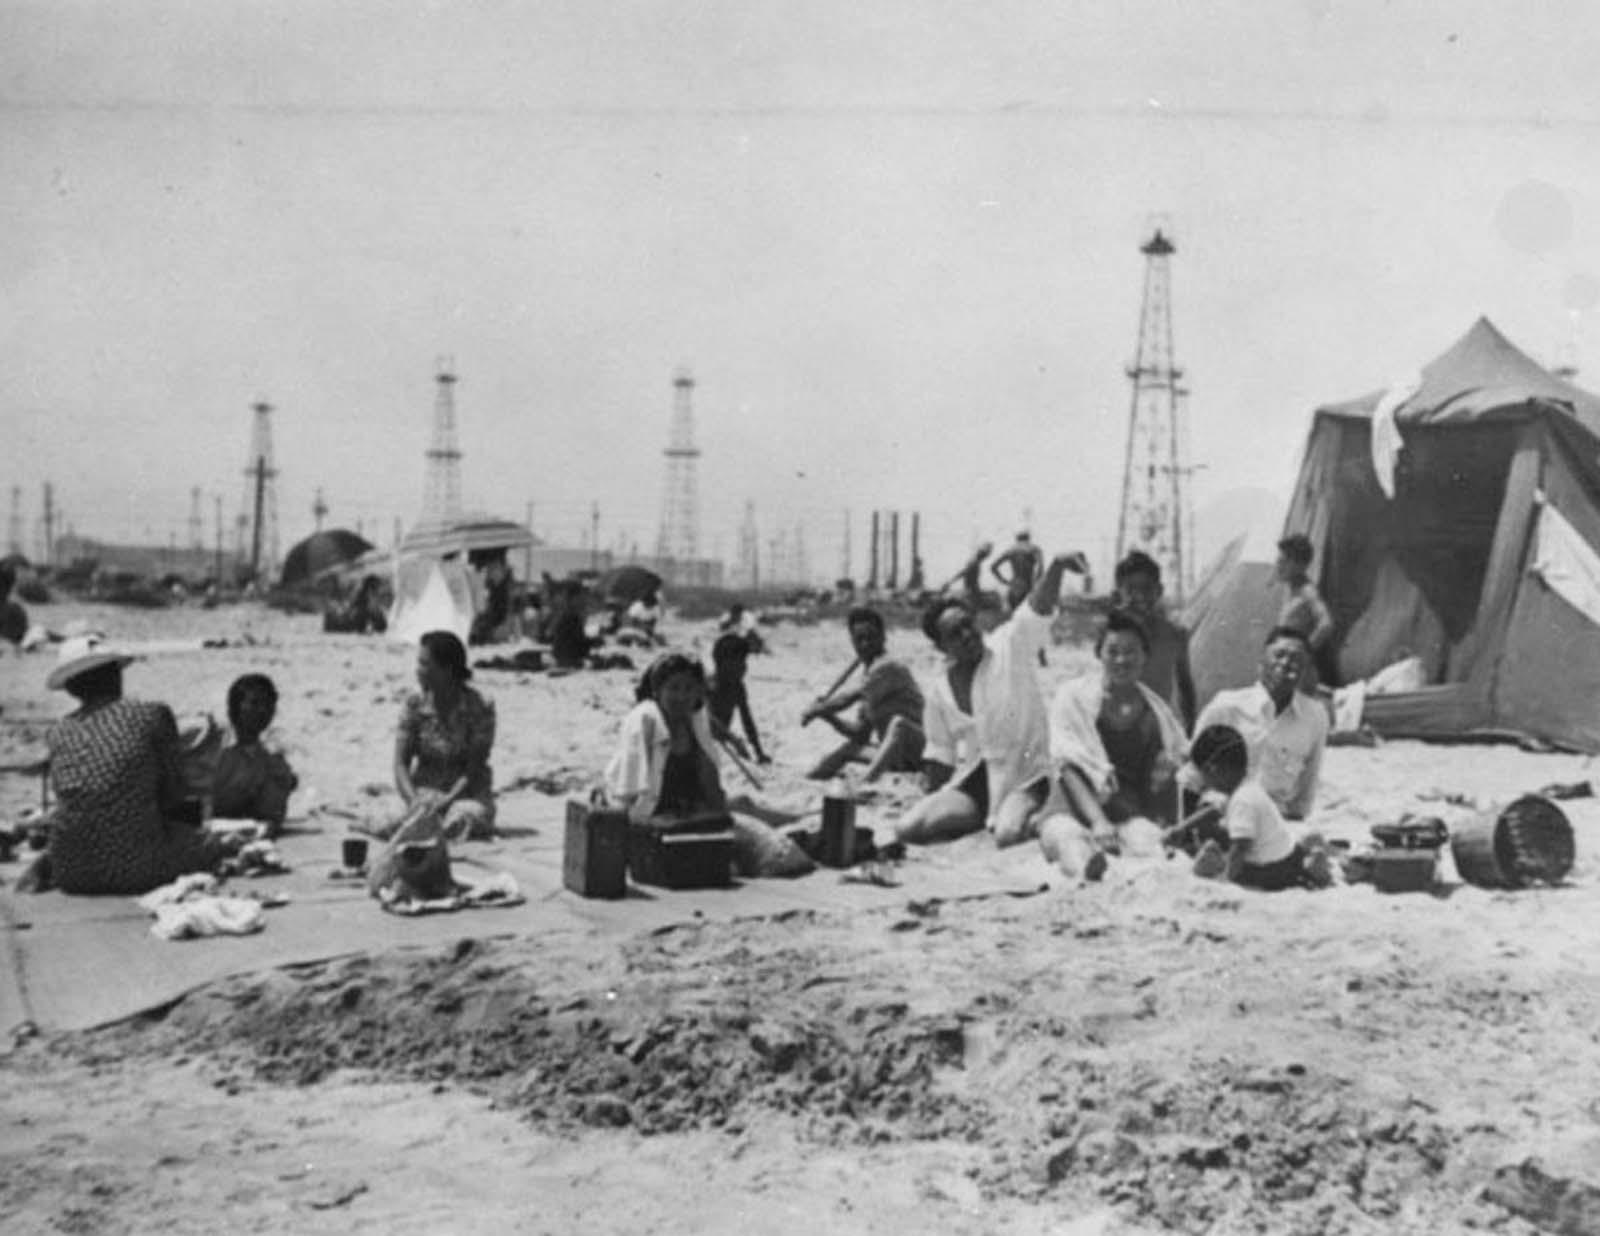 A family beach picnic with Signal Hill oil derricks in the background, 1920